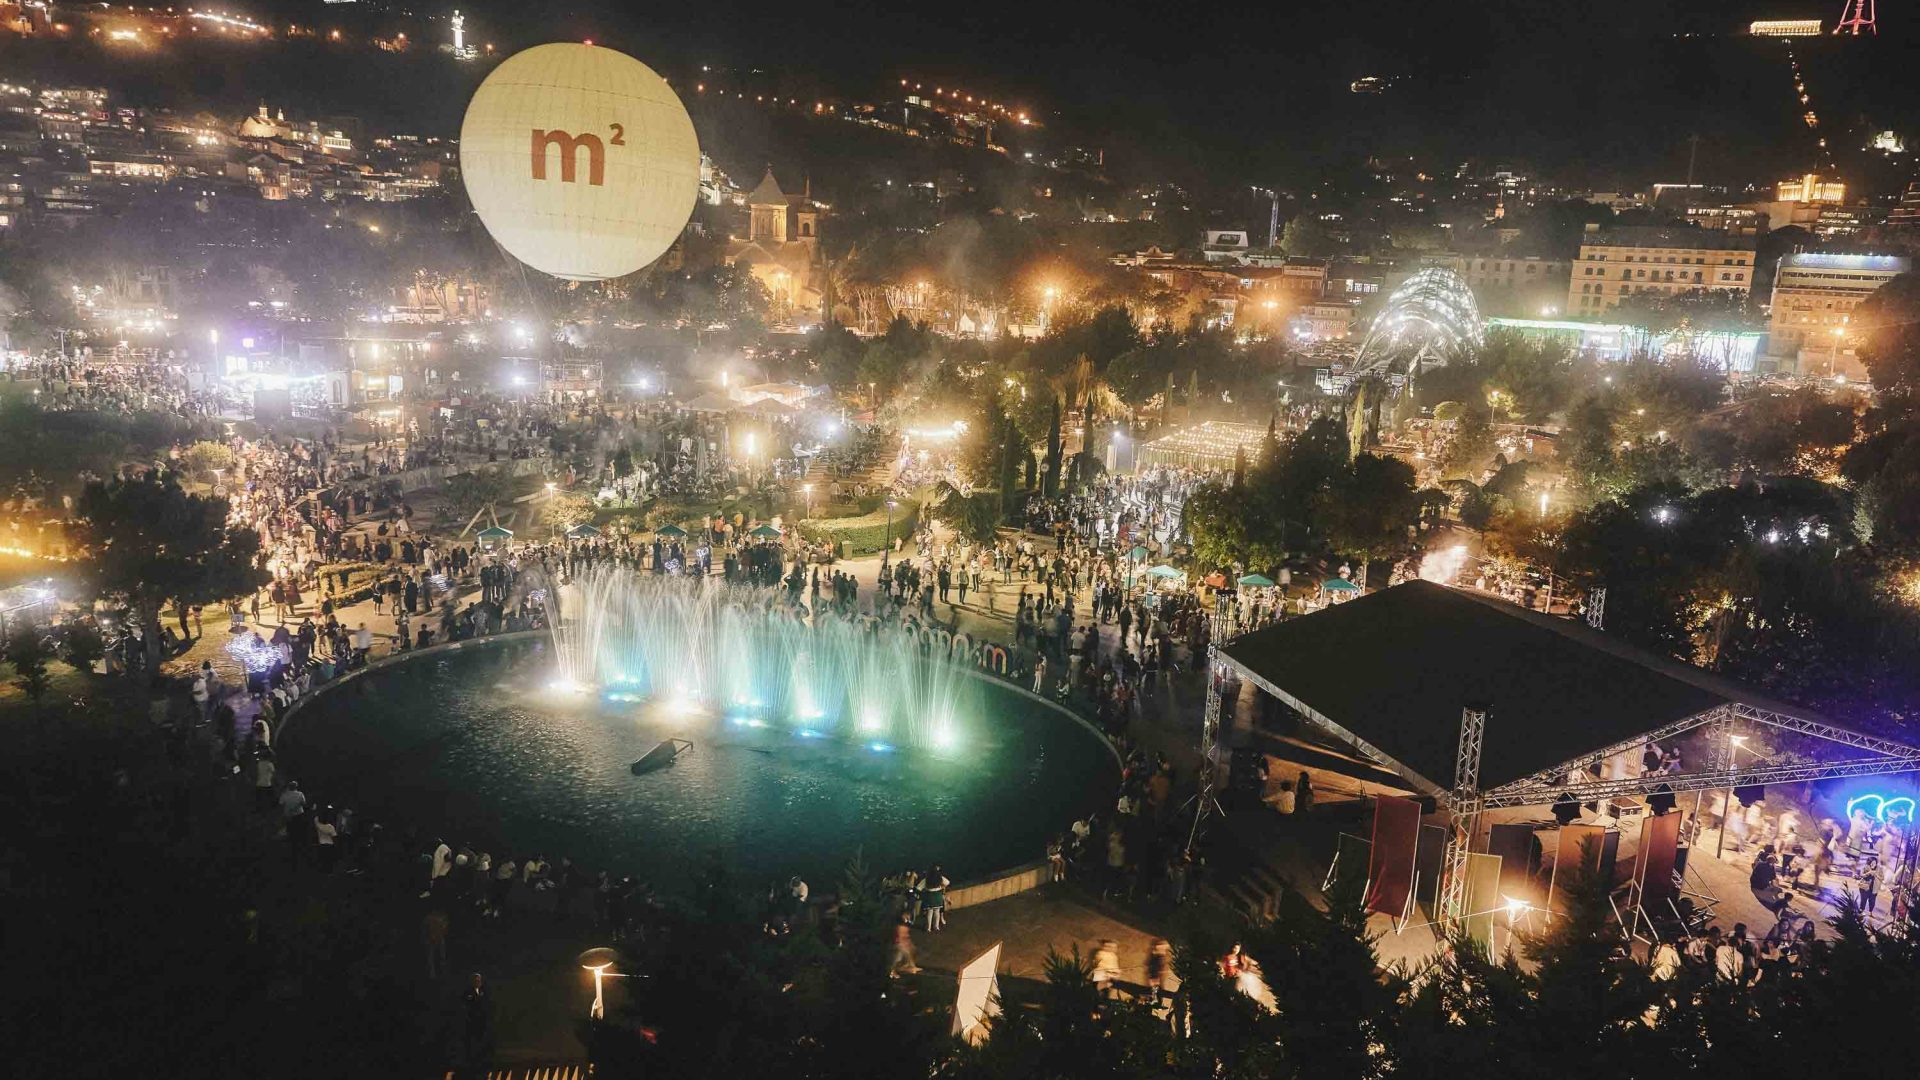 Looking down at a brighly lit up festival at night.